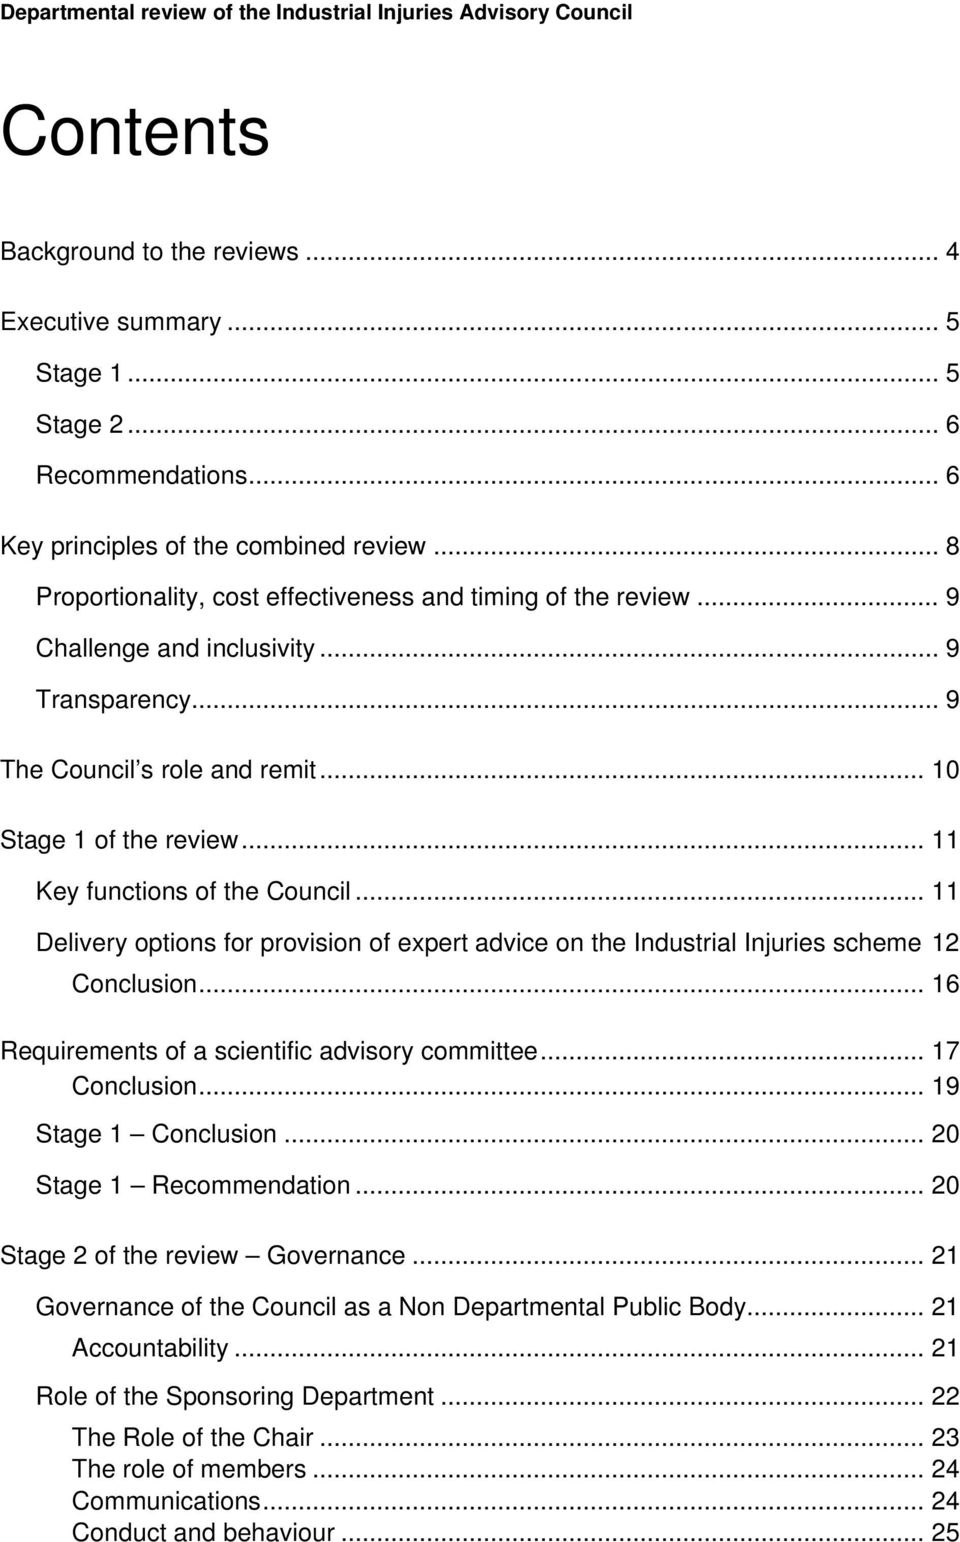 .. 11 Key functions of the Council... 11 Delivery options for provision of expert advice on the Industrial Injuries scheme 12 Conclusion... 16 Requirements of a scientific advisory committee.